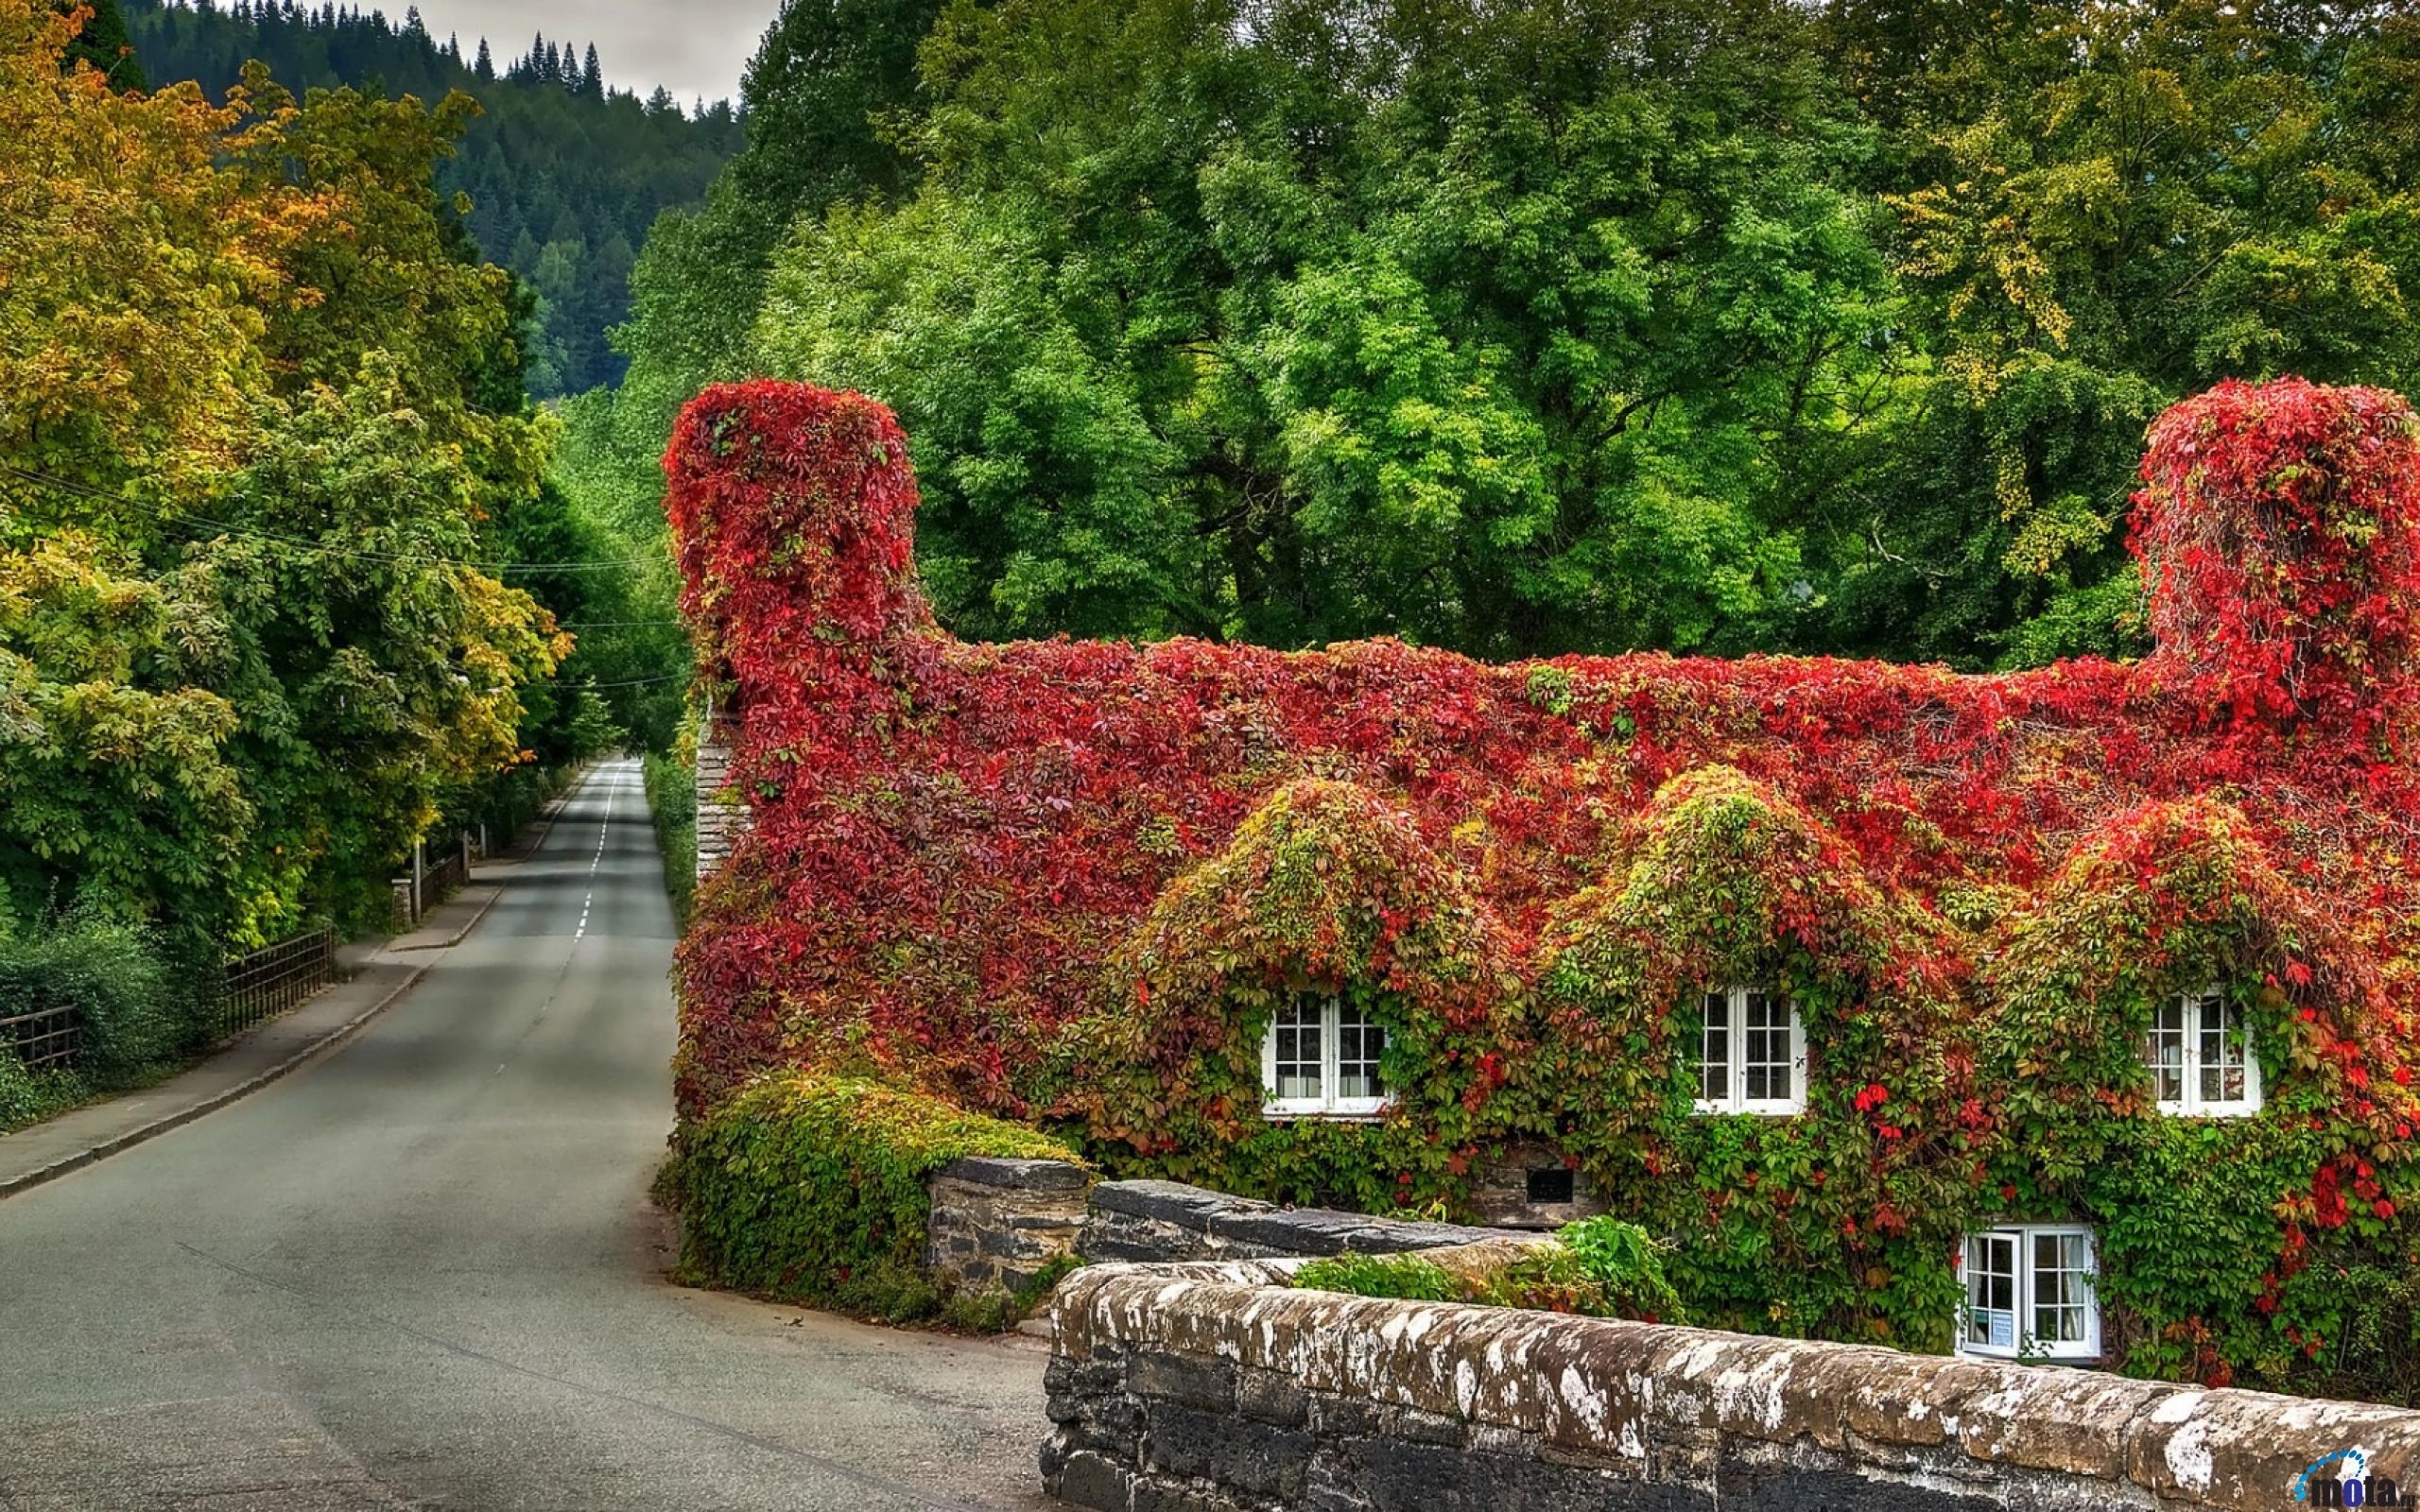 Ivy-Covered House in Wales